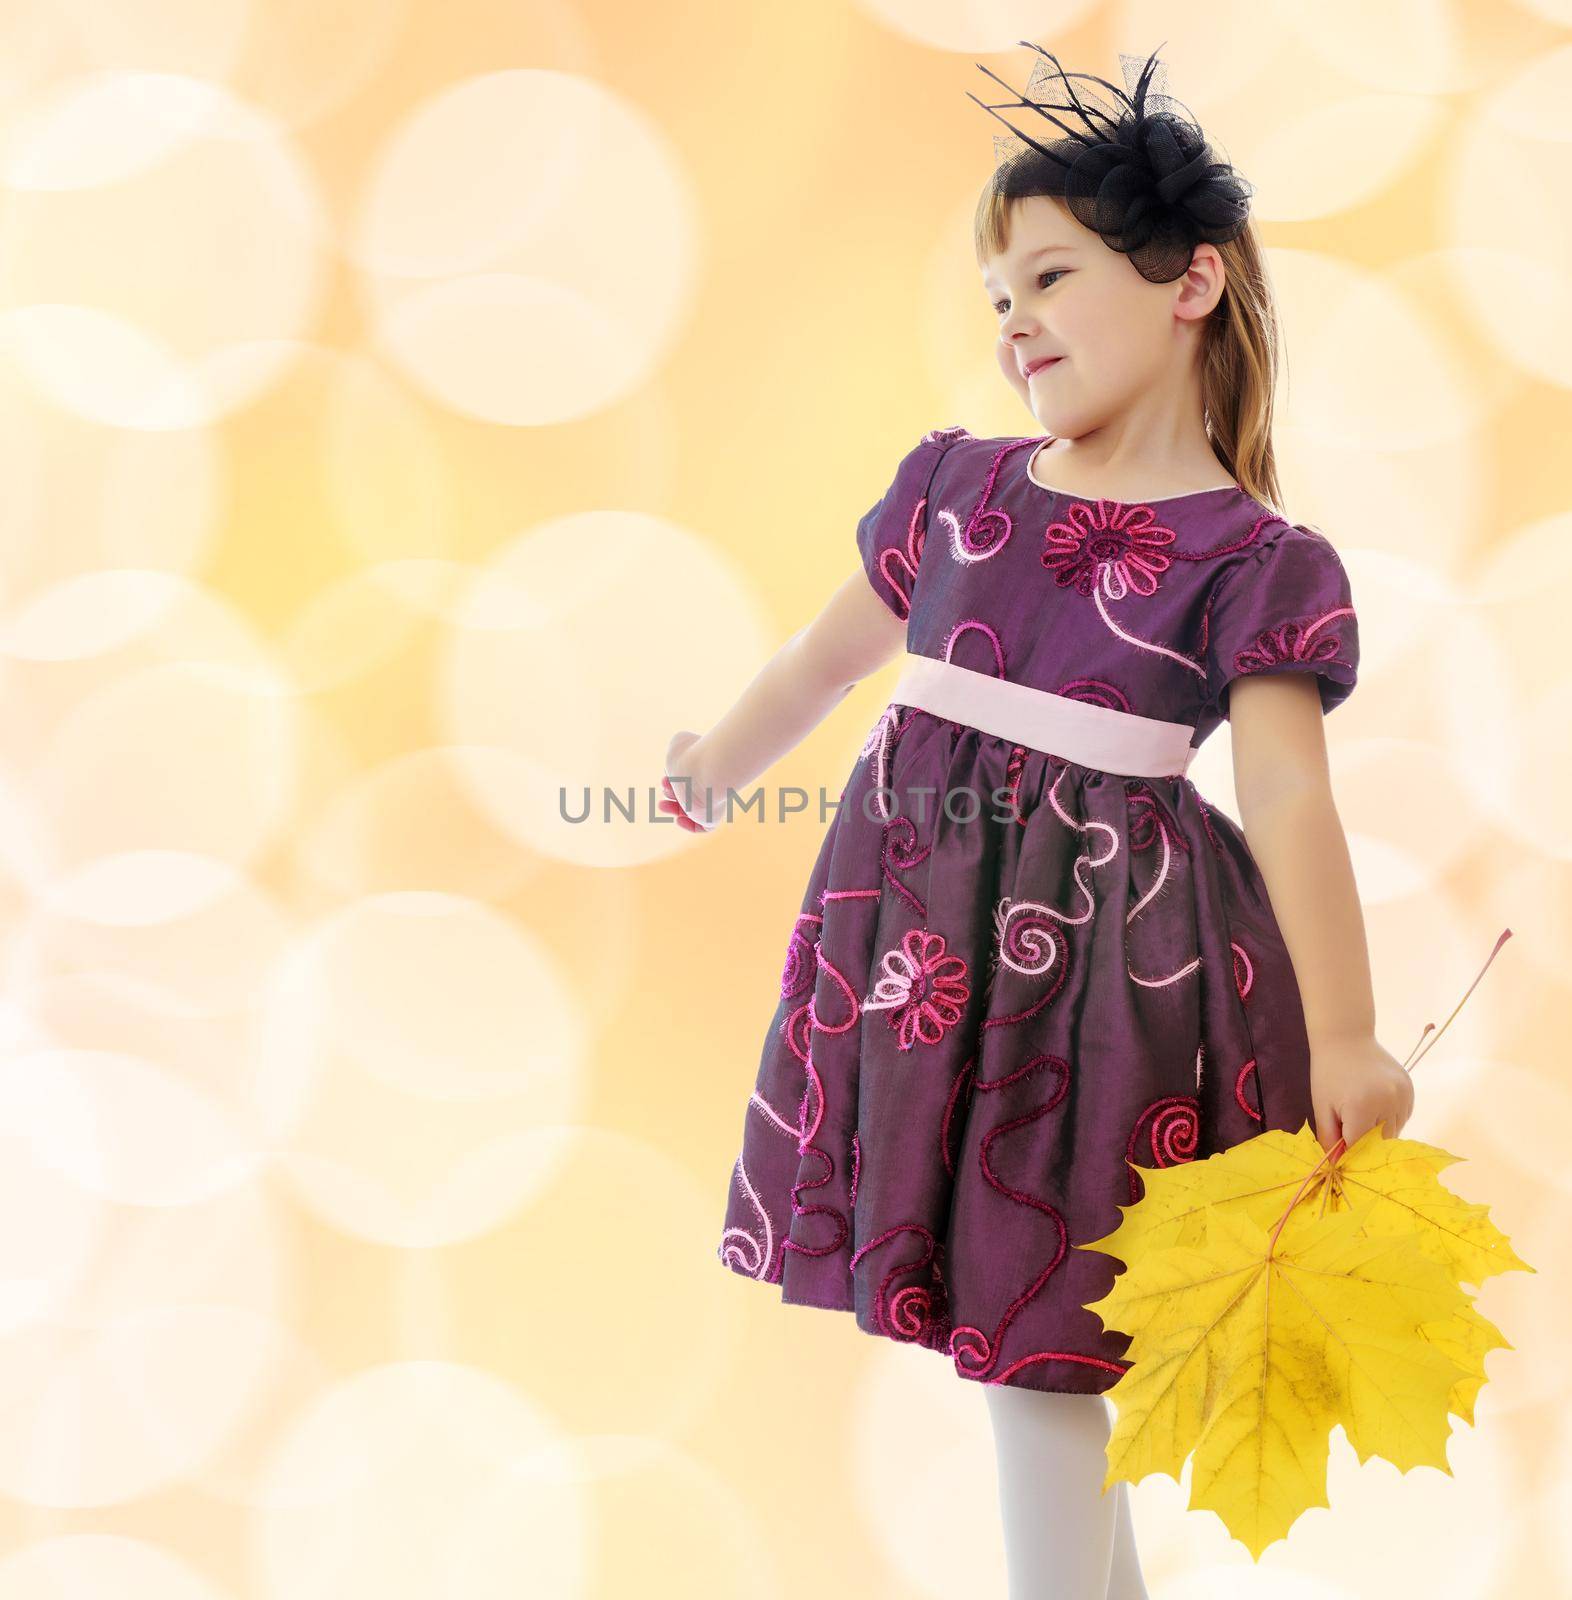 Caucasian little girl dressed in brown dress. She is holding a bouquet of maple leaves. Turning sideways to the camera.On a brown background with white blurred circles.